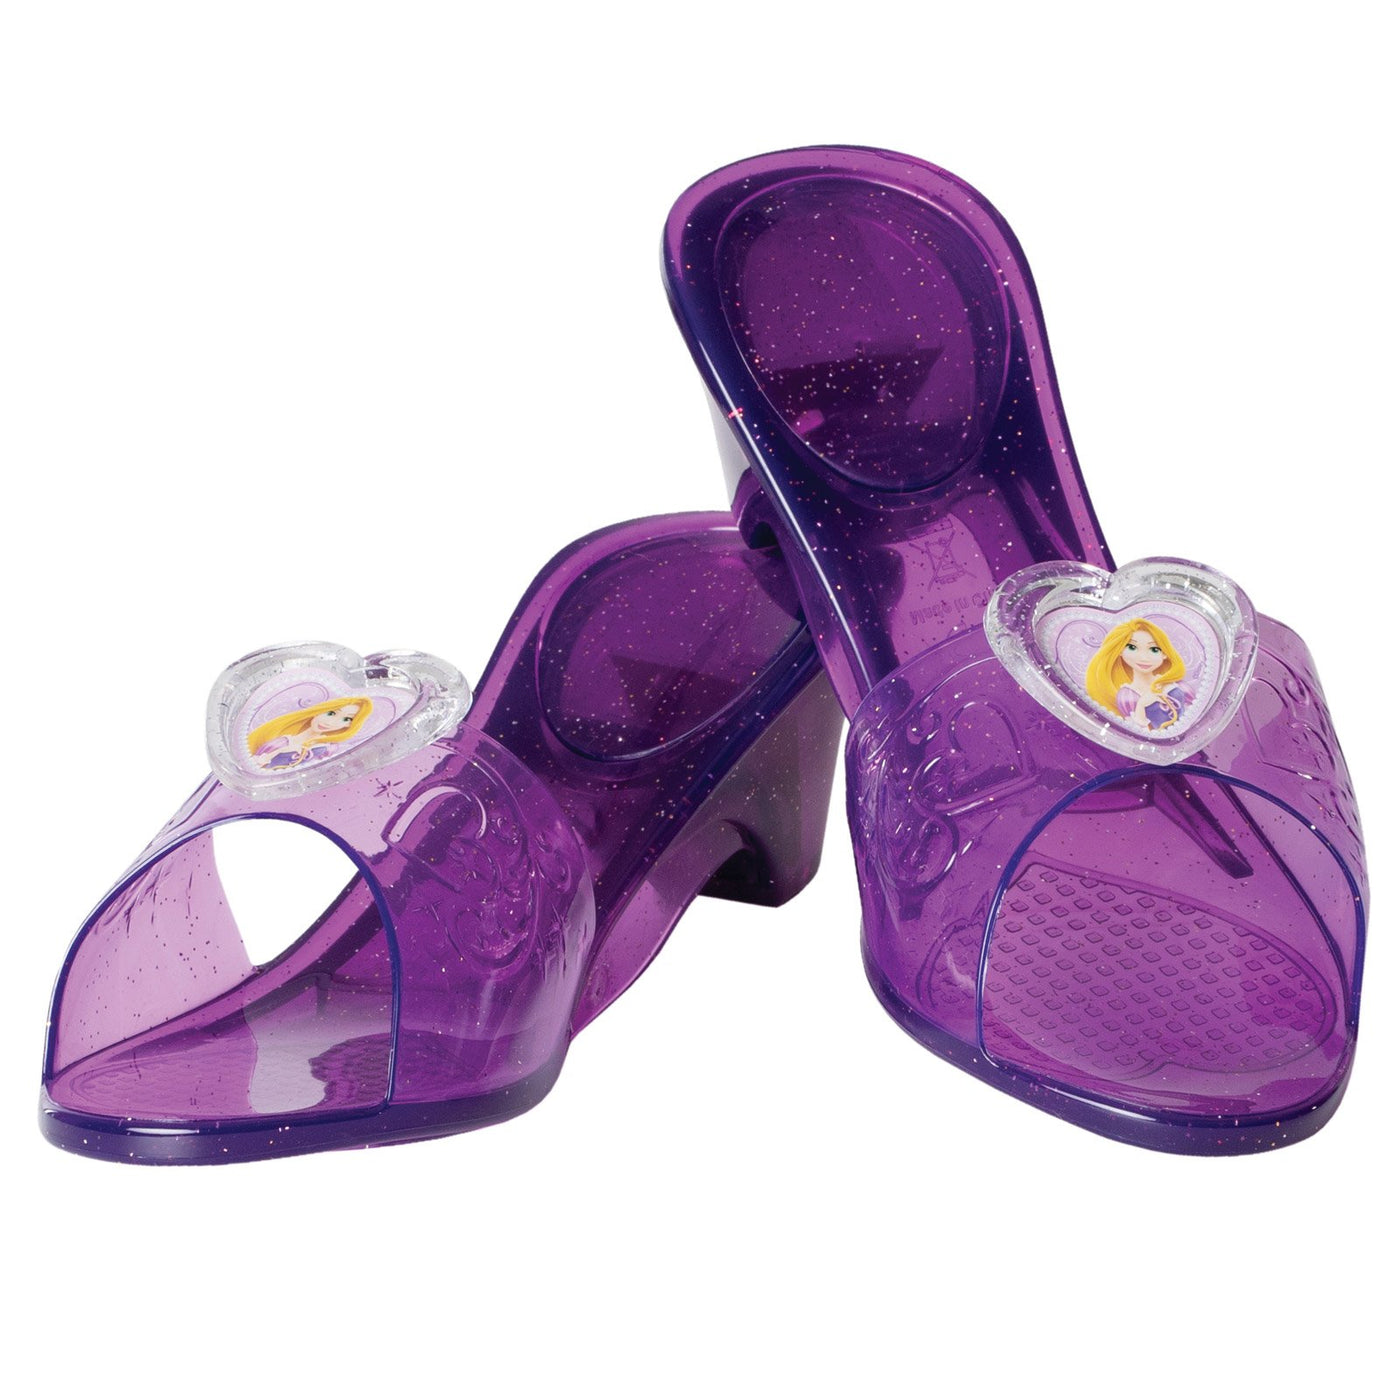 Buy Princess Dress Up Shoes for Girls - Princess Heels, Tiaras, and Jewelry  Set - Toddler Gifts for Ages 3, 4, 5, 6, Birthday Gifts for Girls Online at  Lowest Price Ever